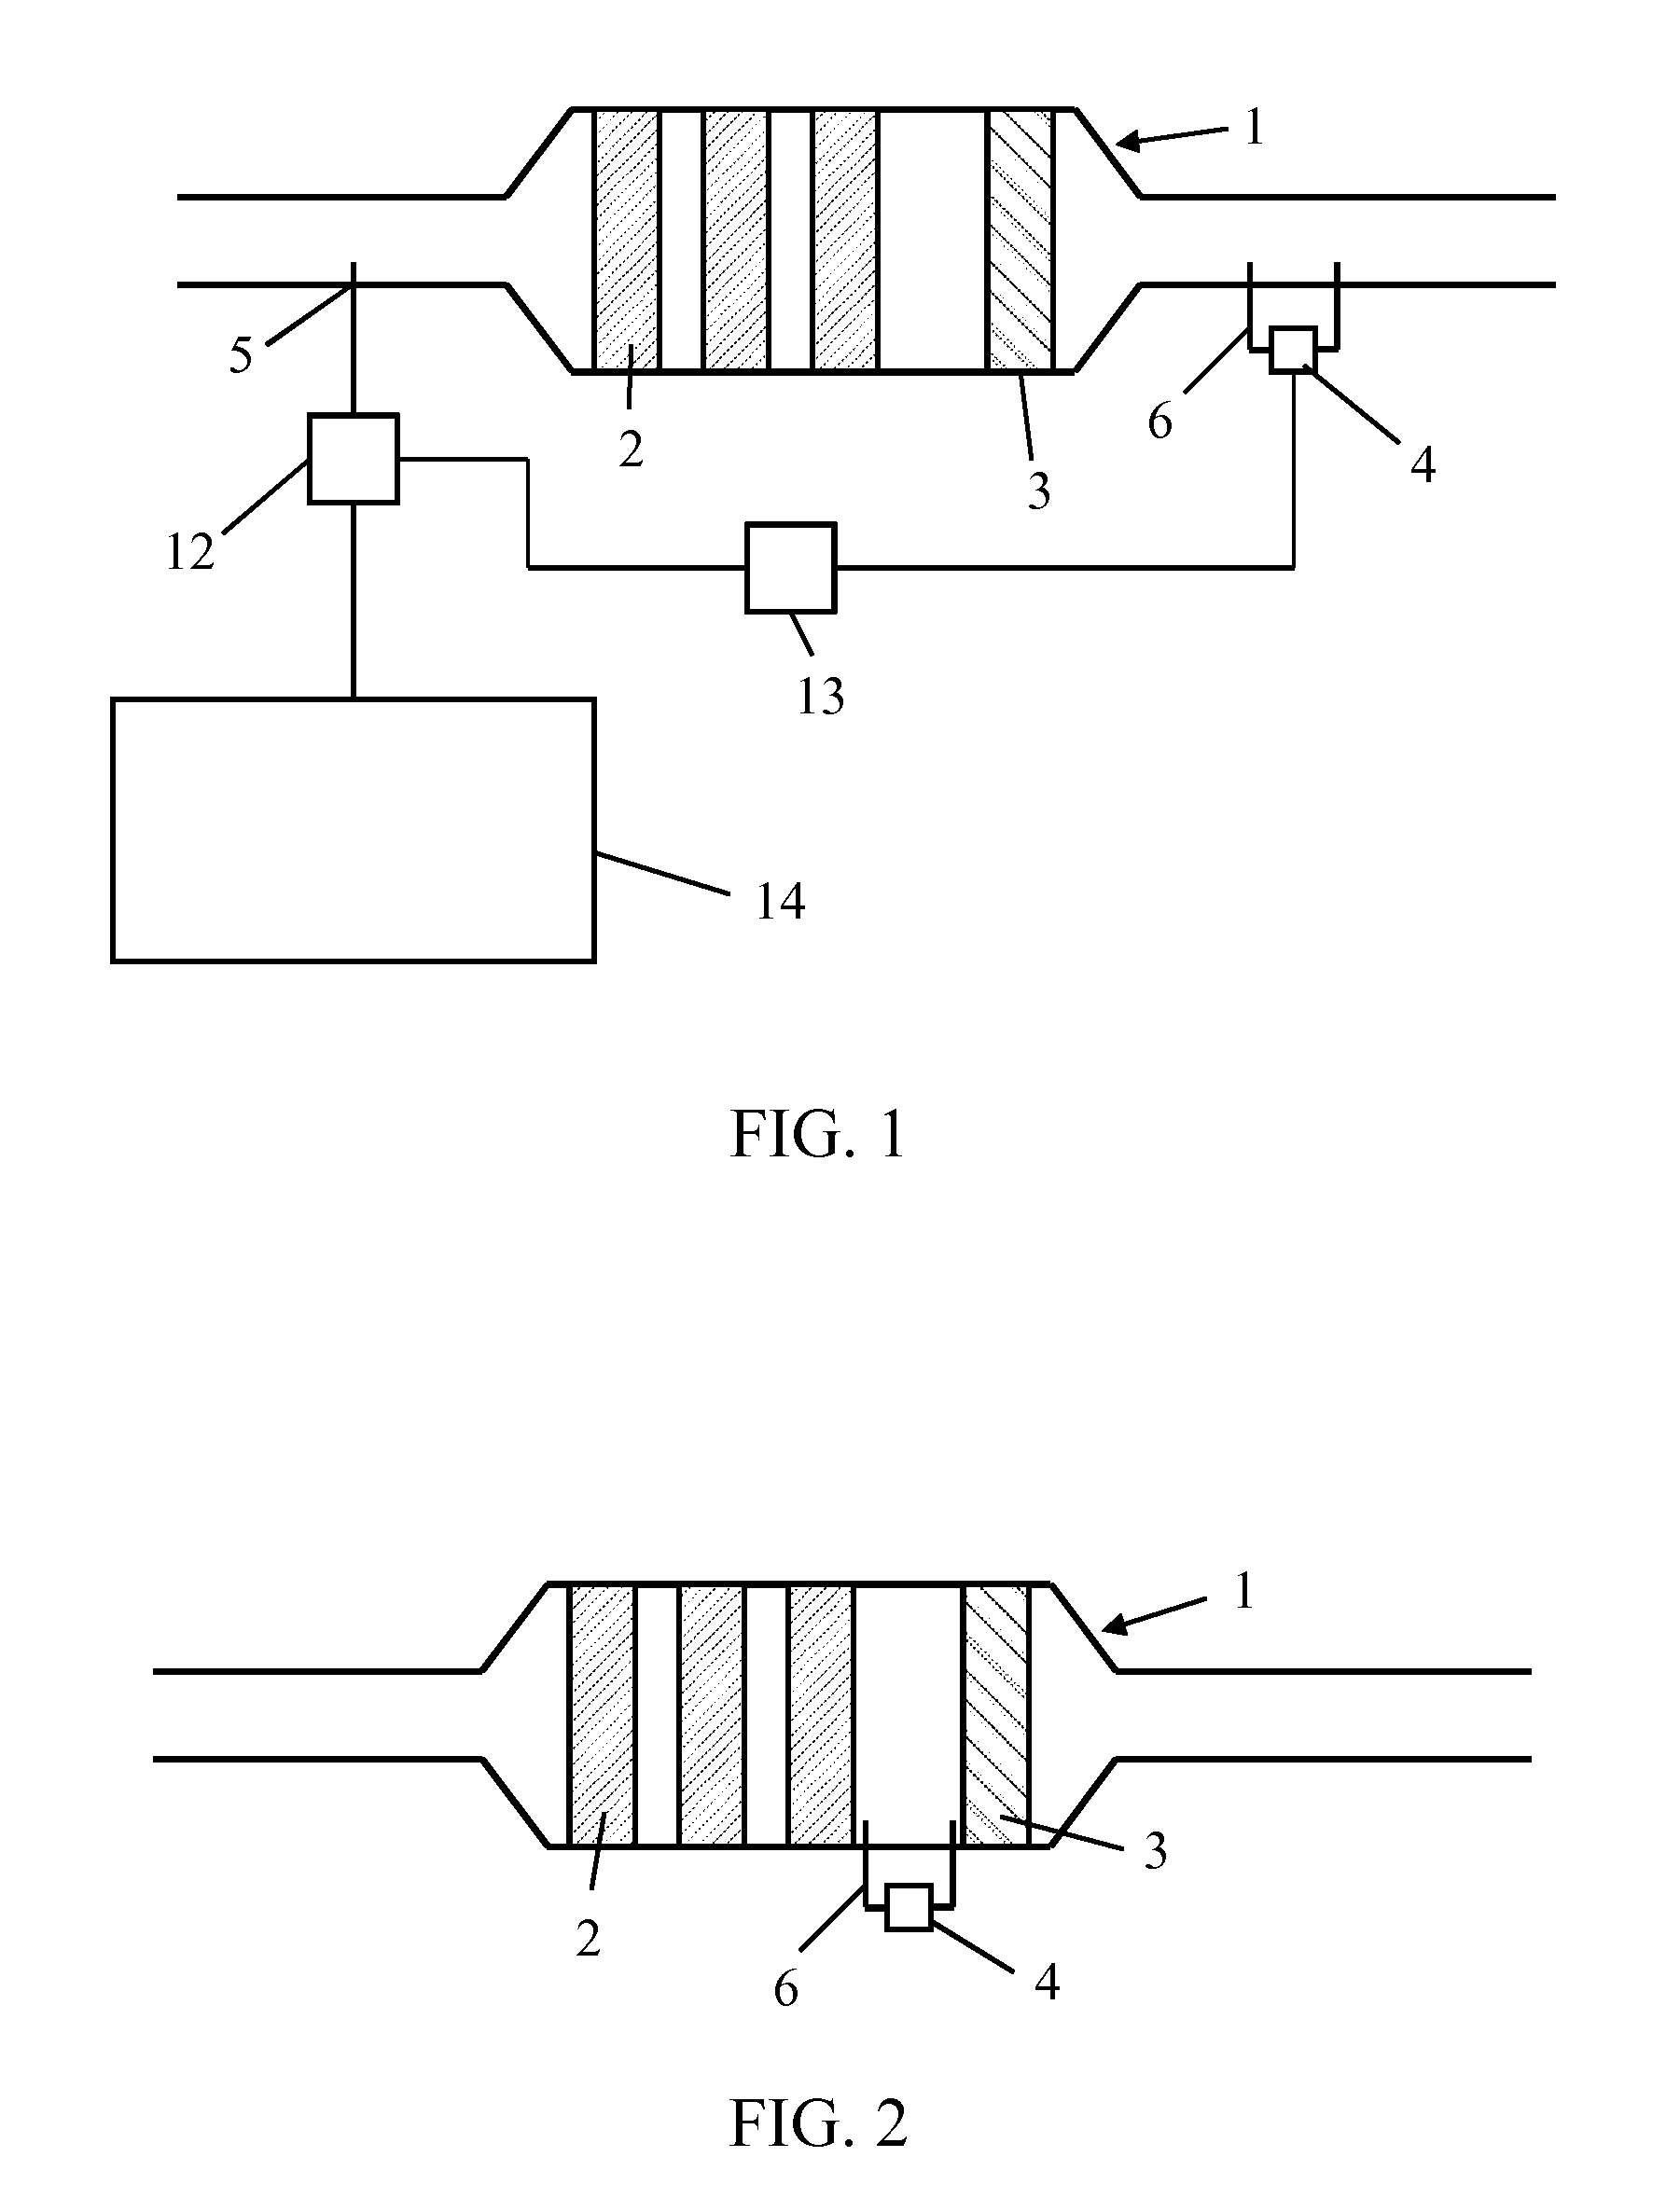 Control method and arrangement for selective catalytic reduction